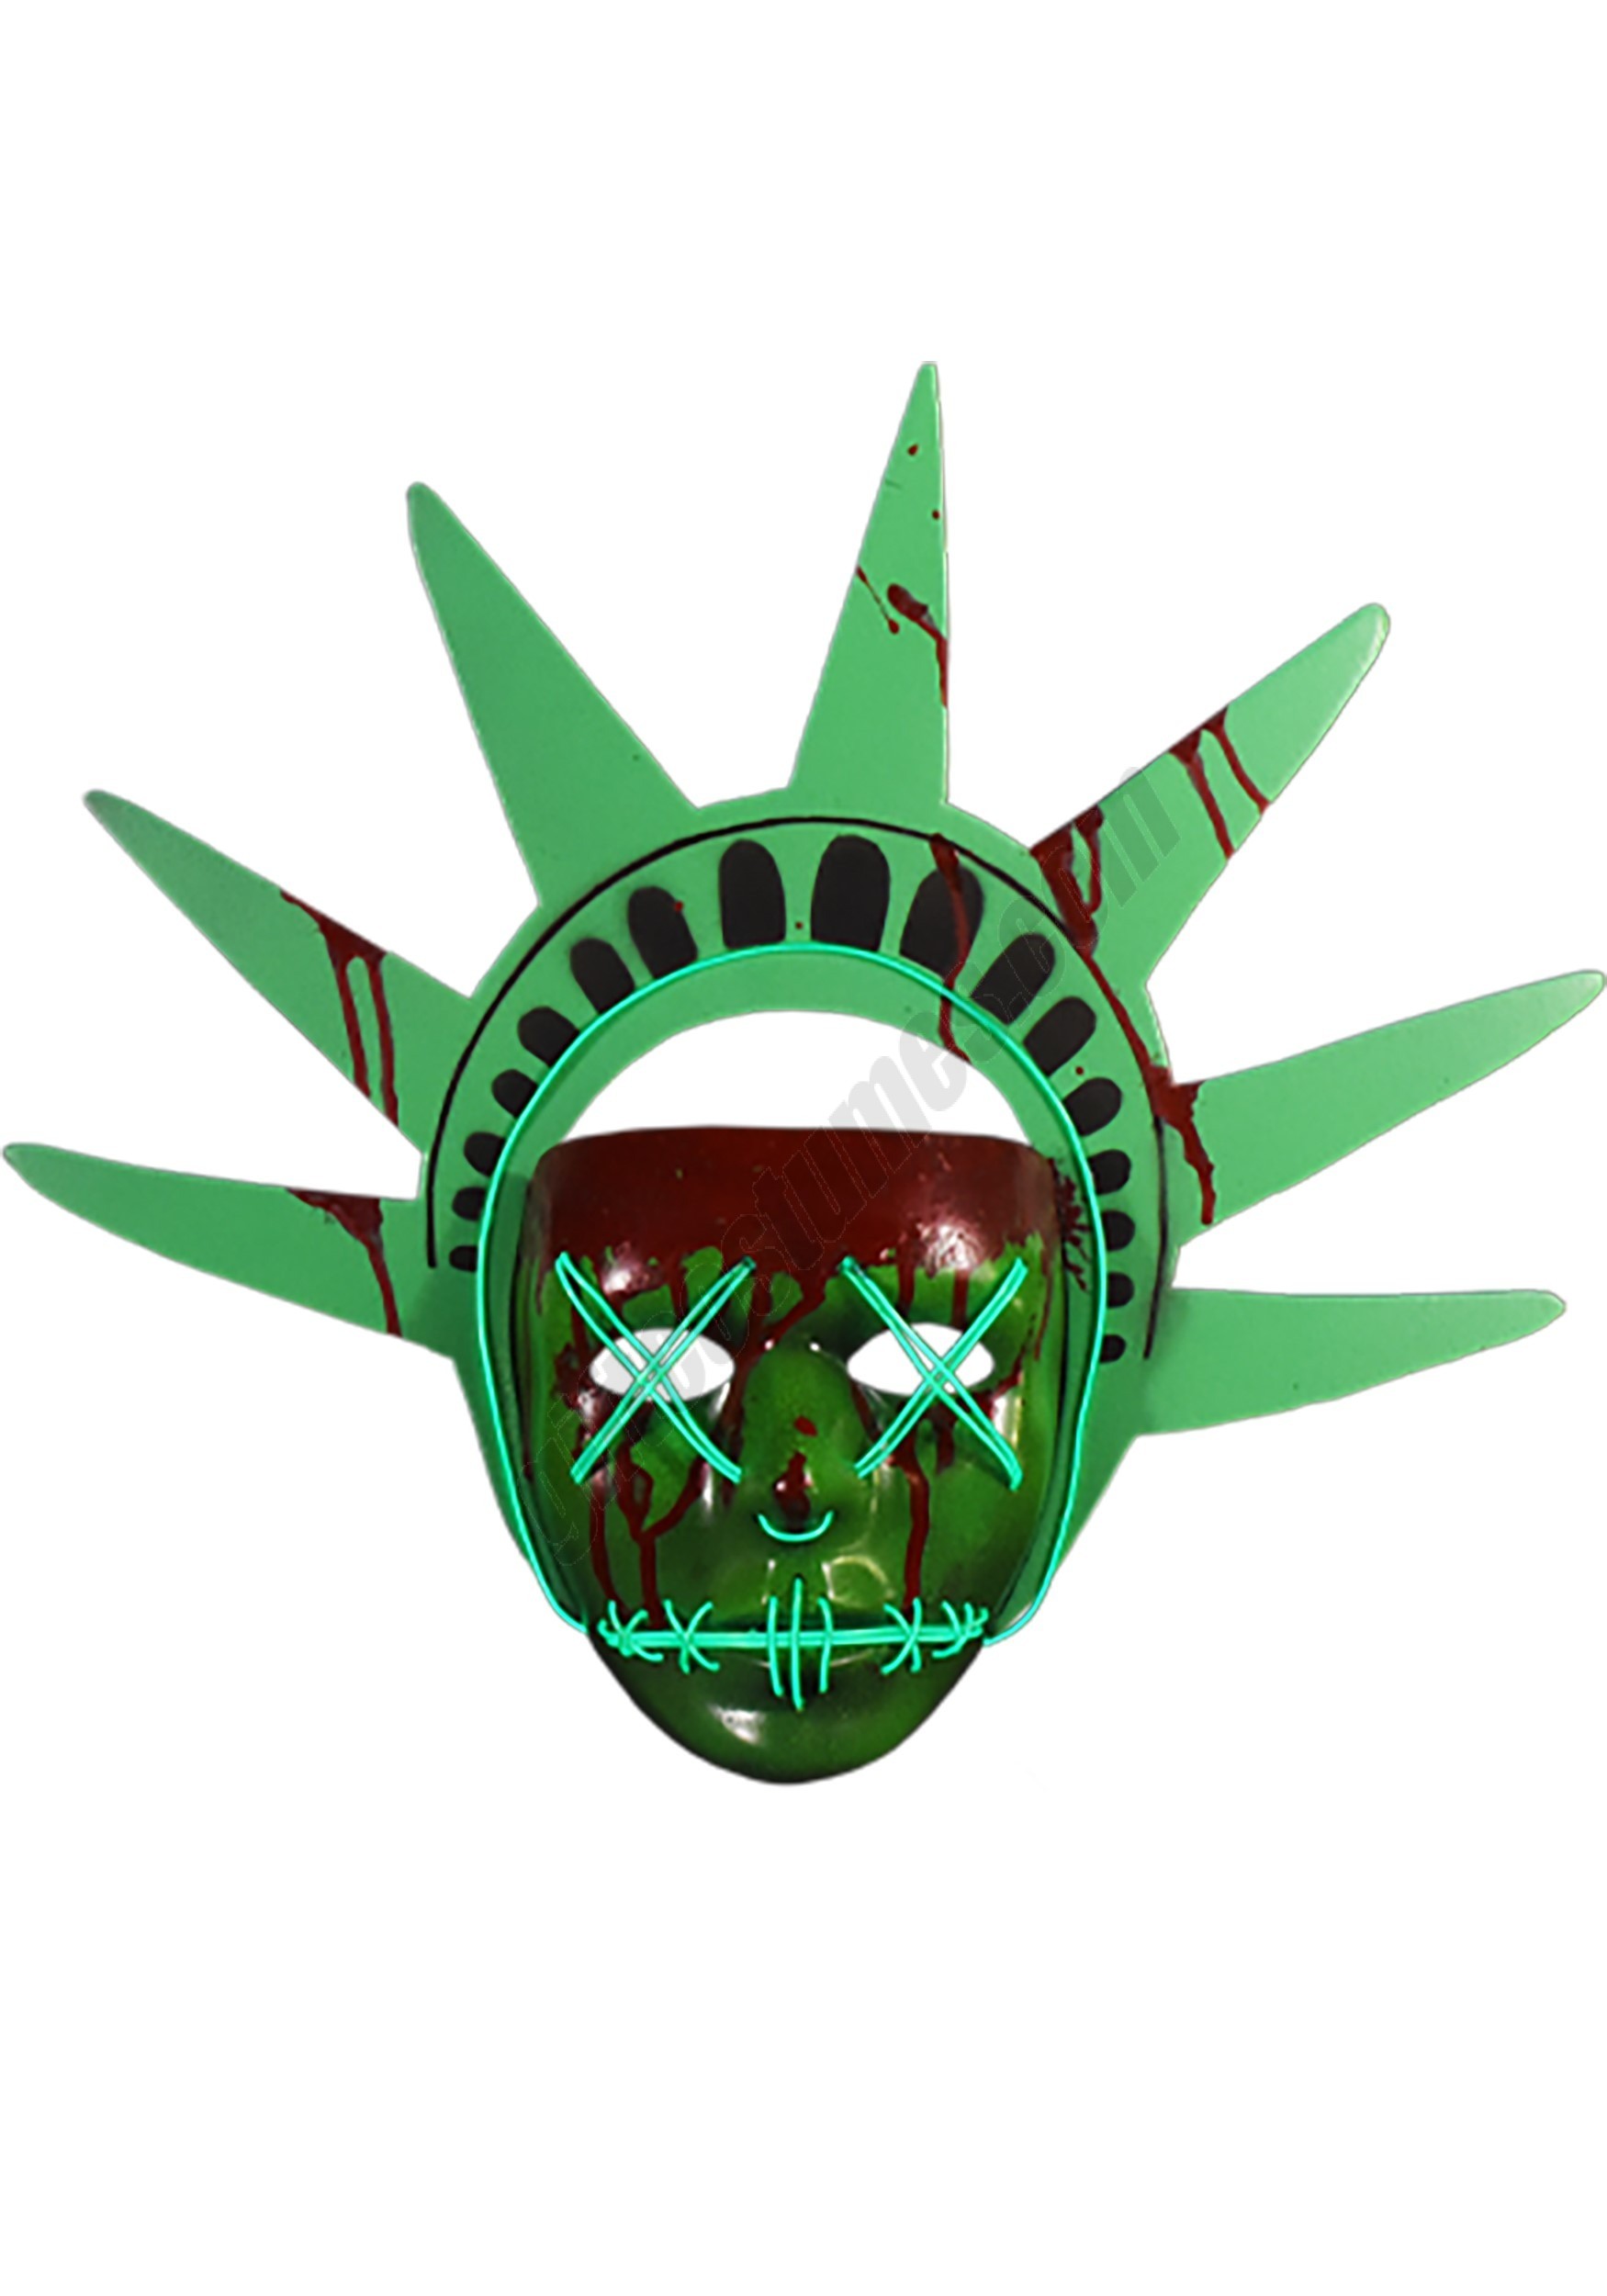 Lady Liberty Light Up Mask from The Purge Promotions - Lady Liberty Light Up Mask from The Purge Promotions